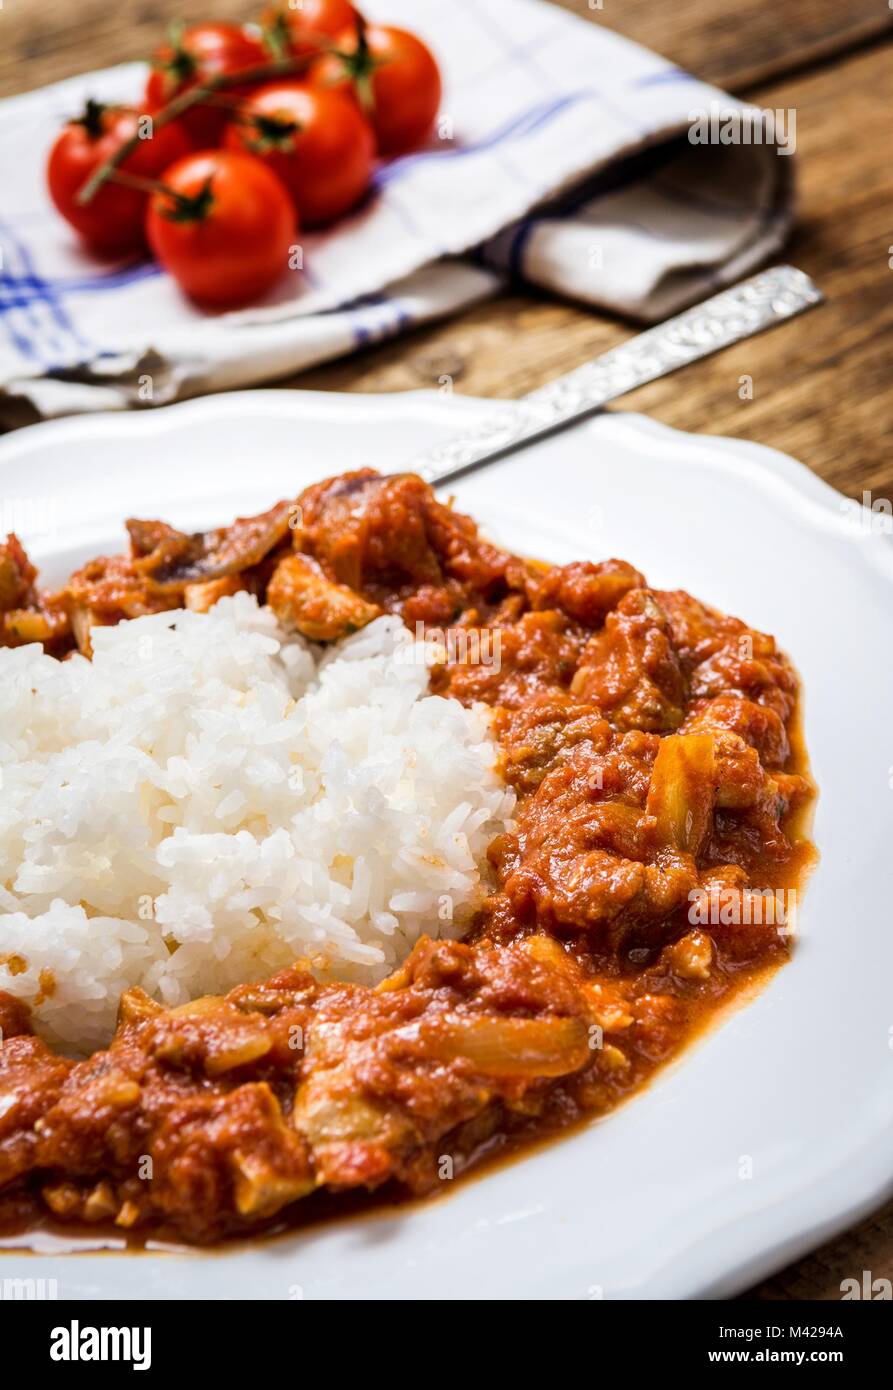 Traditional indian cuisine. Spicy tikka masala with rice on wood table Stock Photo